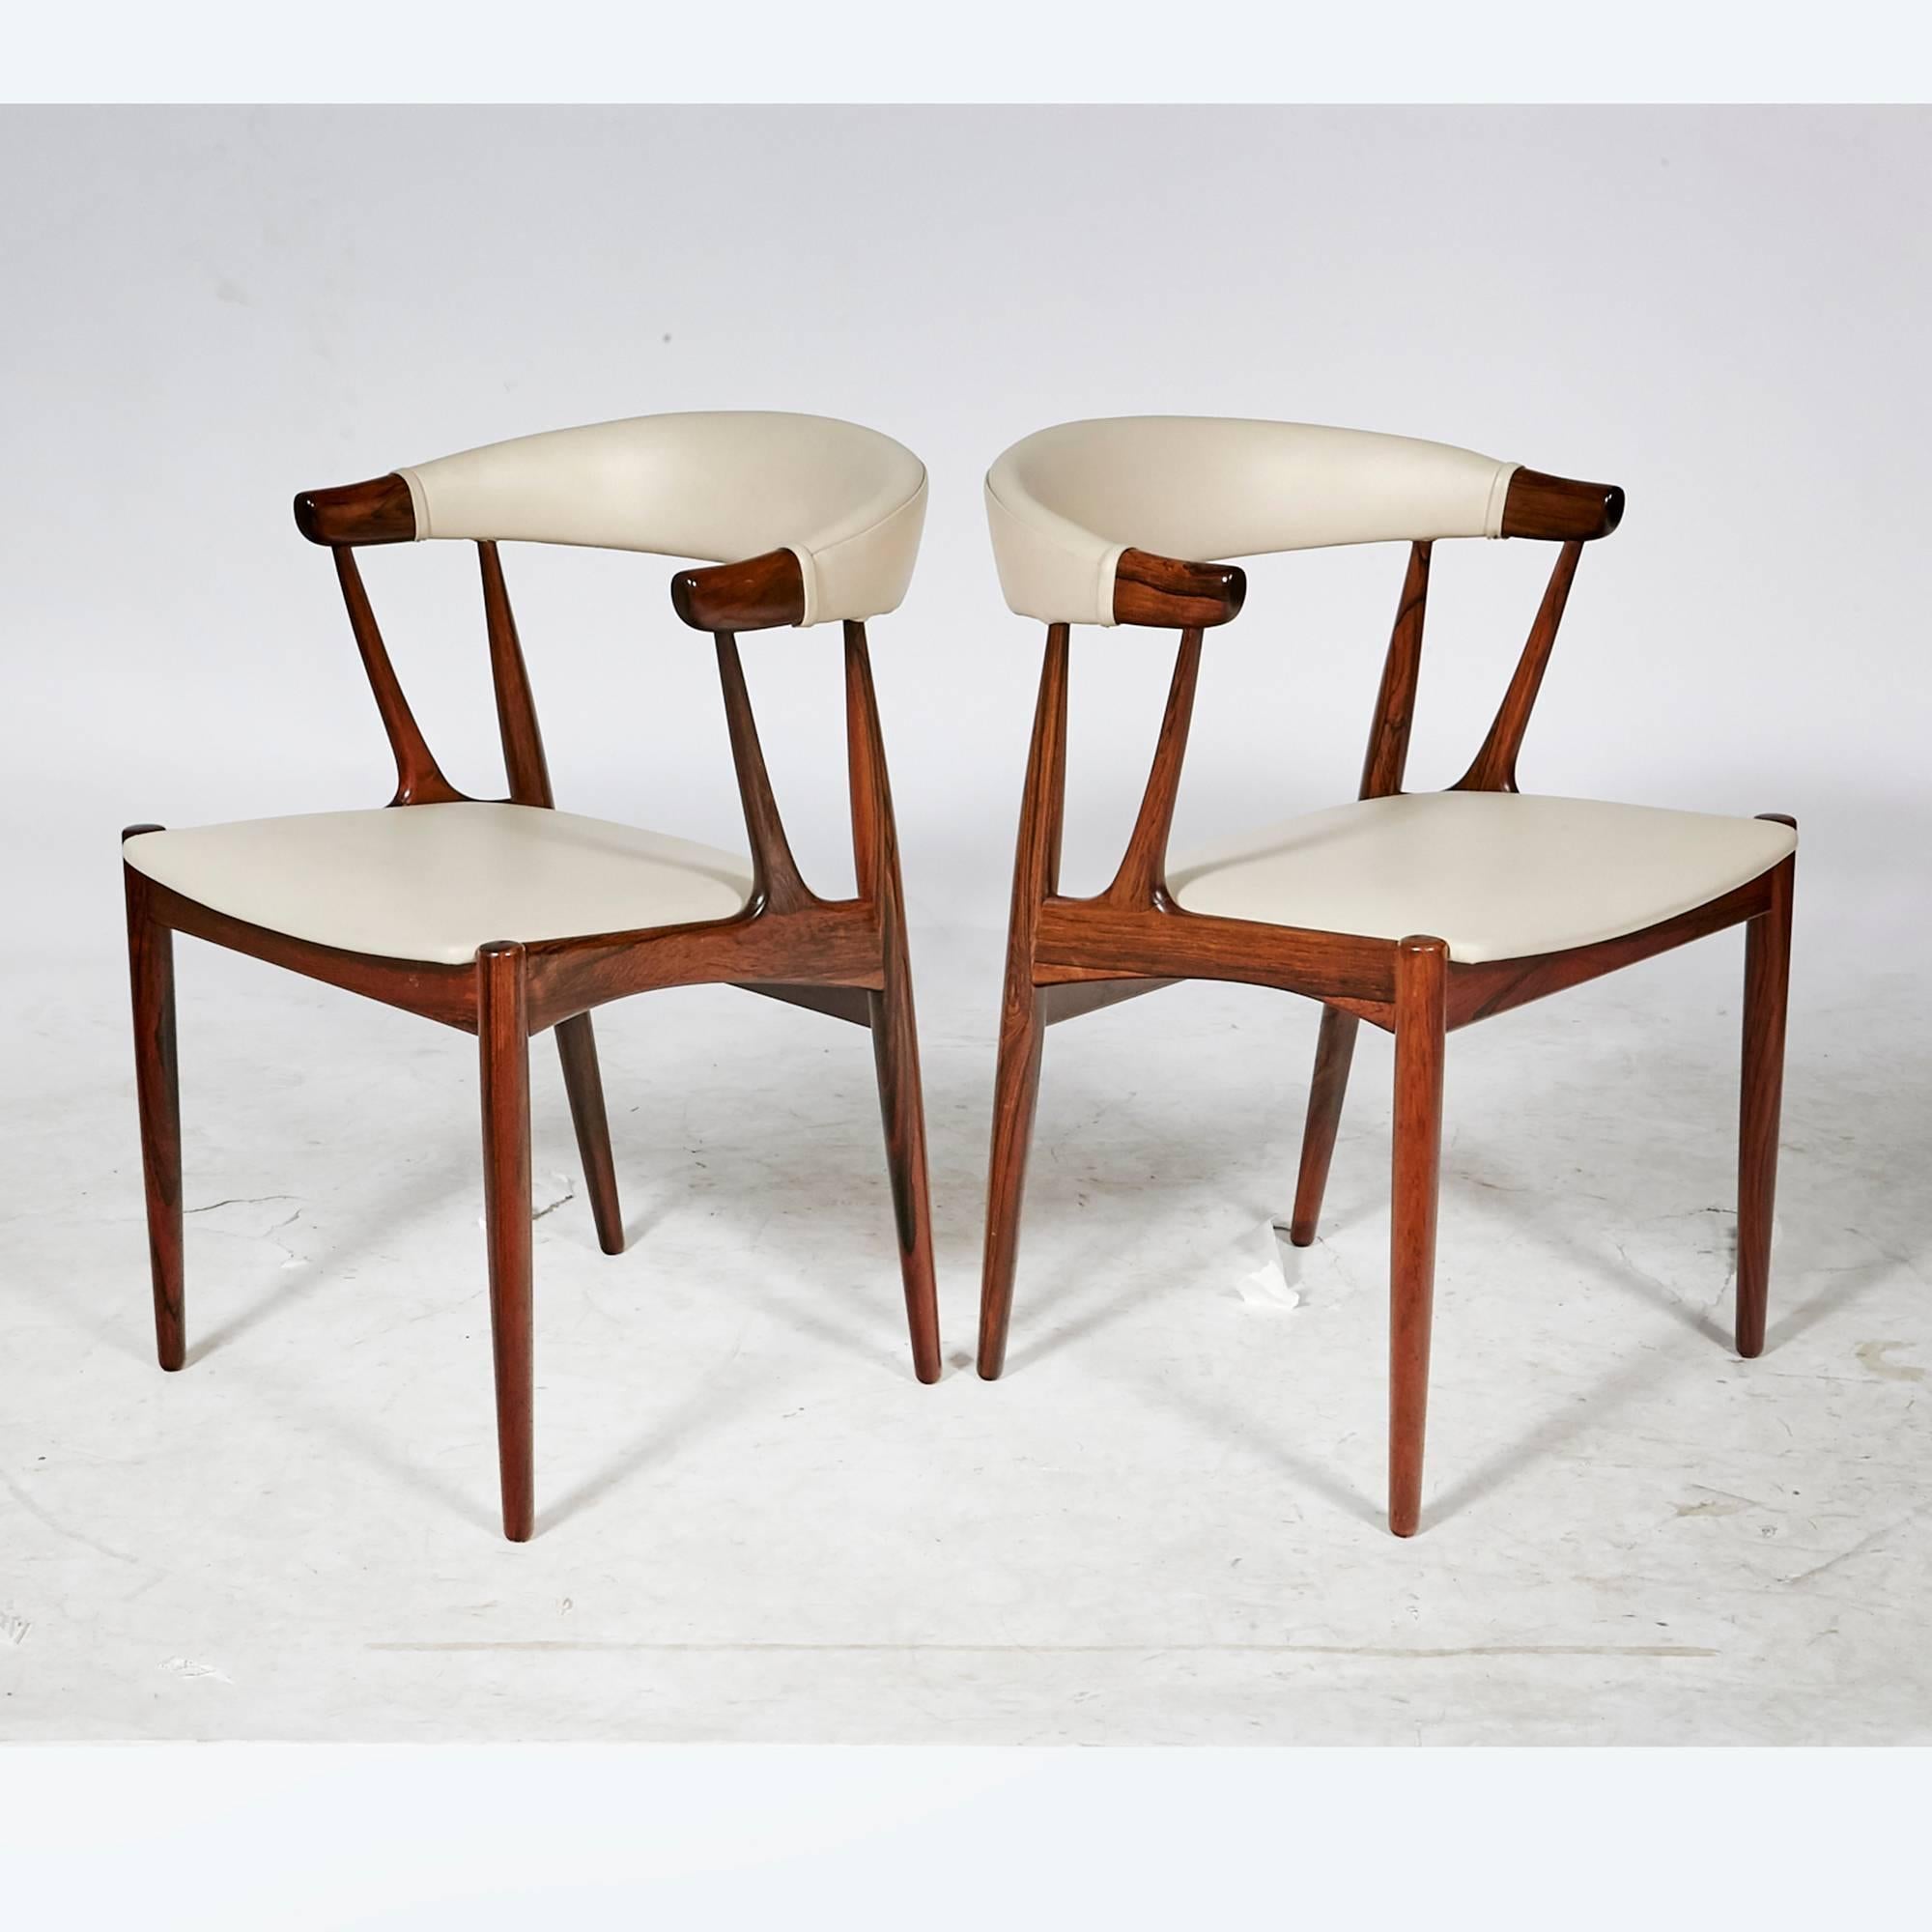 Vintage Scandinavian Modern Danish rosewood set of six dining chairs by Johannes Andersen, circa 1960s. The chairs are model BA113 with the original leather on the chairs. Some wear to leather in spots. Measure: Arm height, 27in.H. Marked.